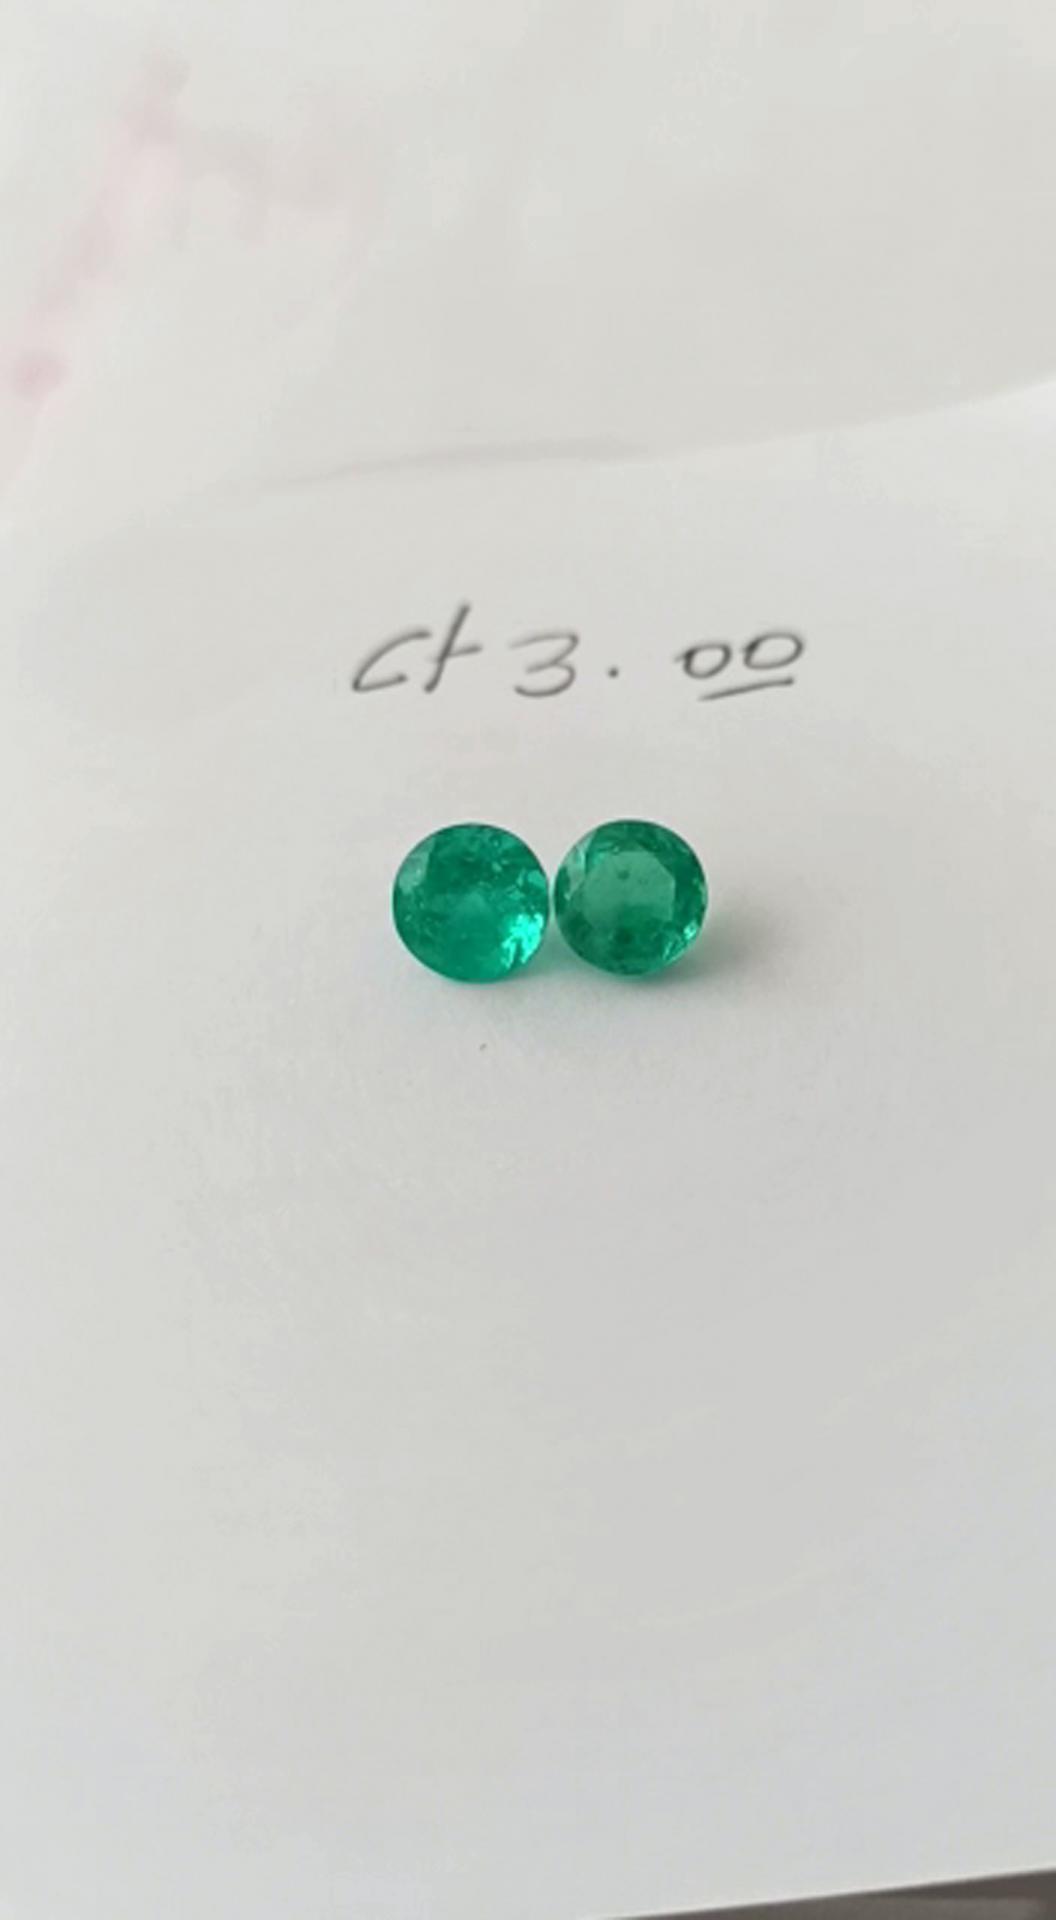 3.0 Ct. Colombian Emerald Pair Calibrated